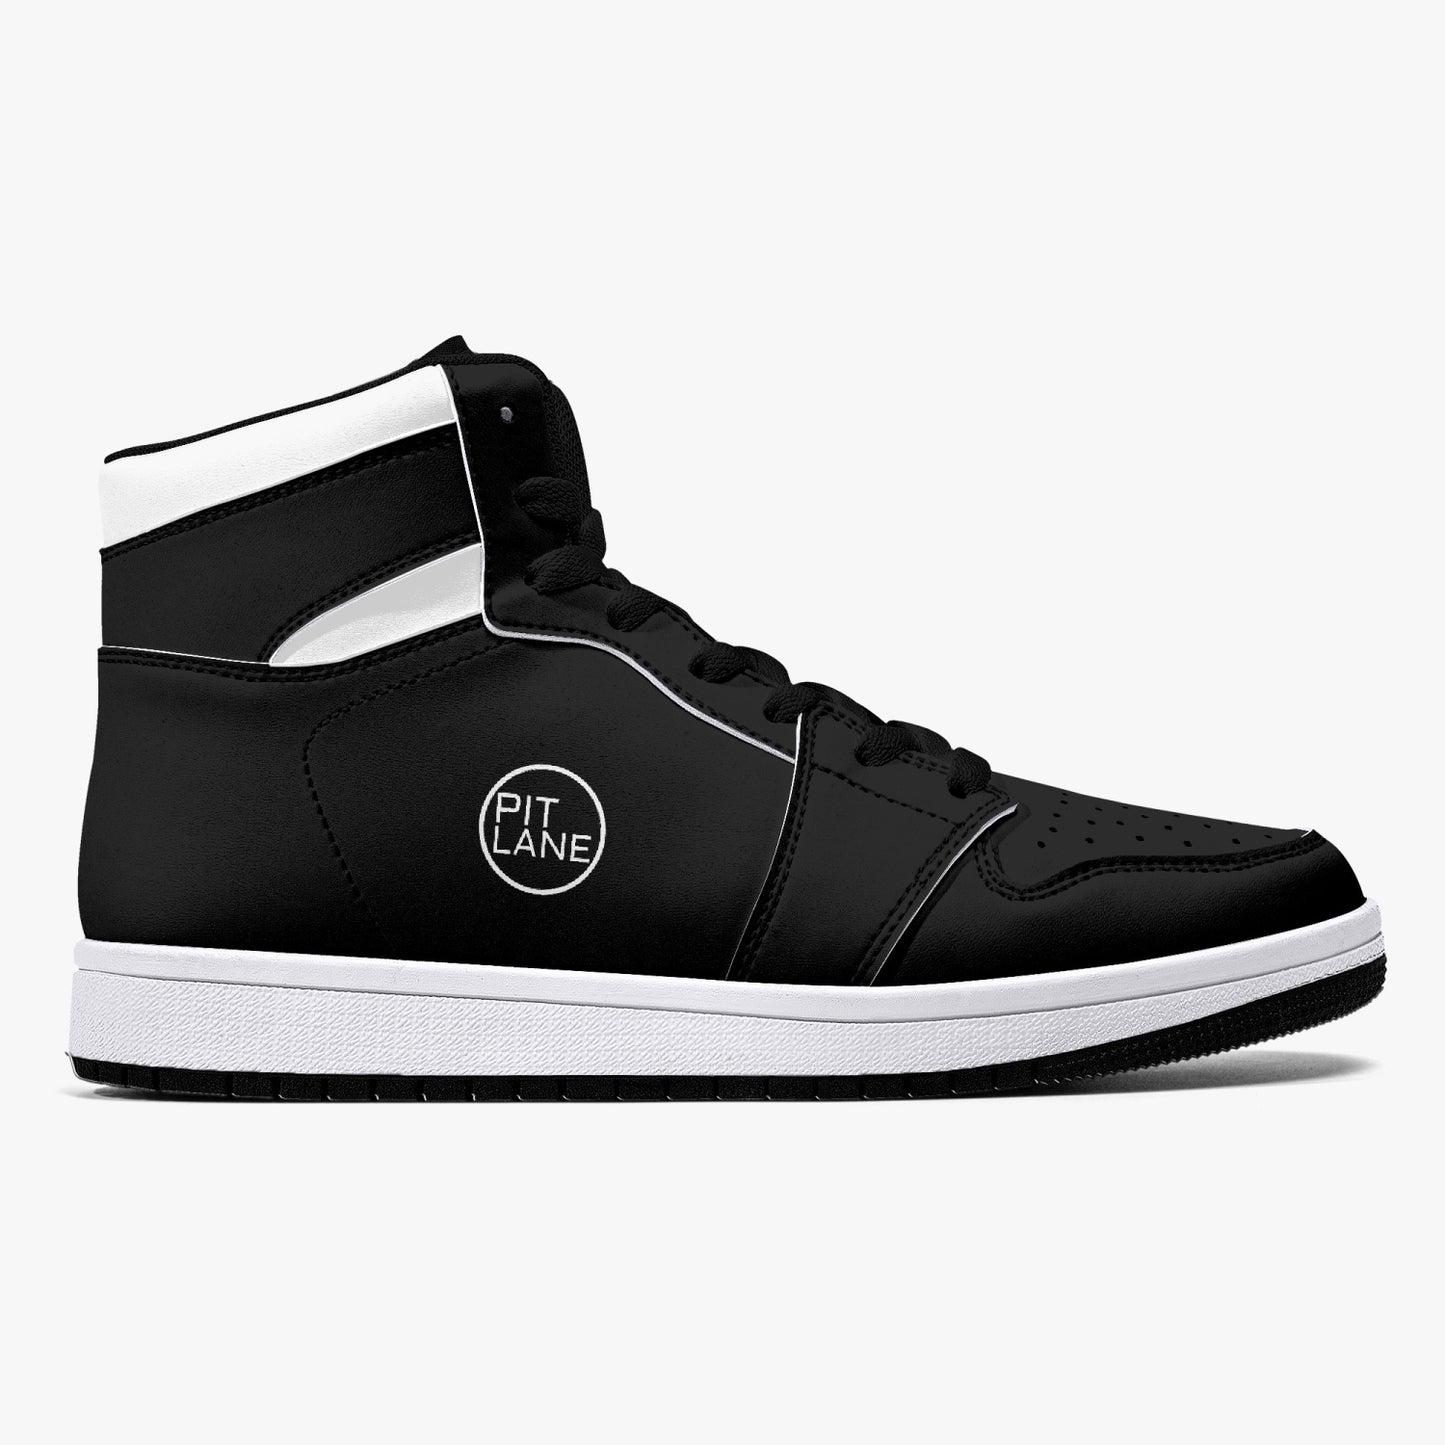 PIT LANE CLOTHING High-Top Full Leather Sneakers - carbon lite